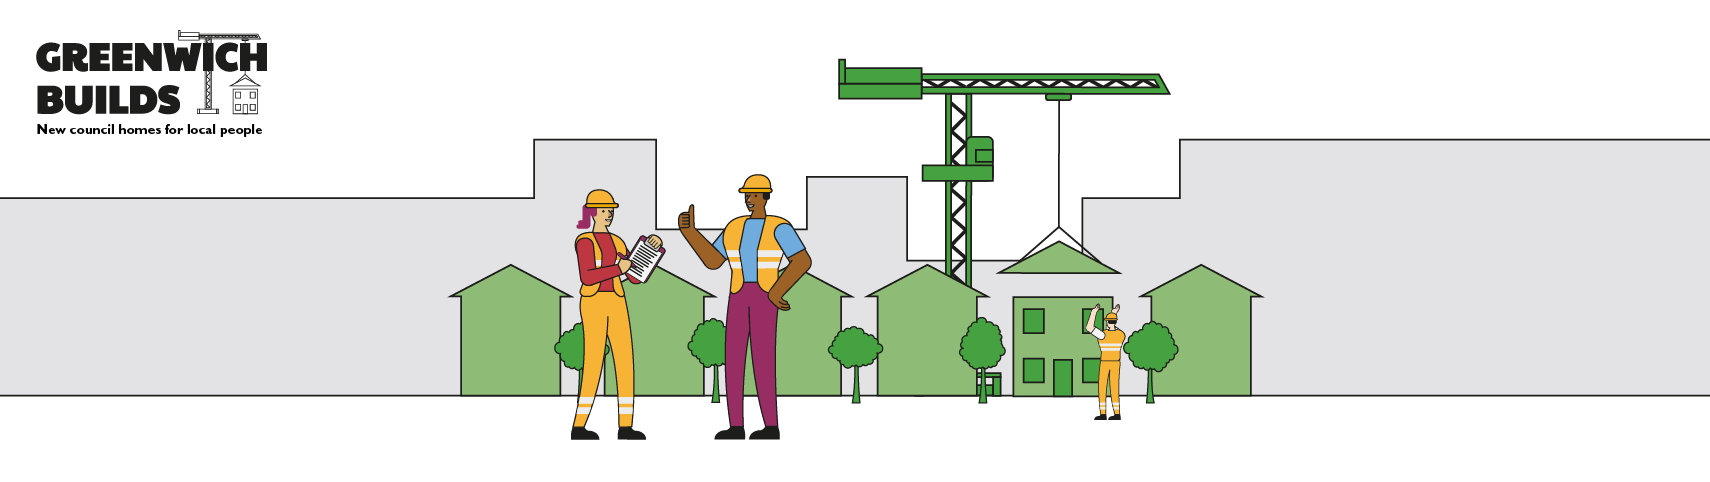 Illustration of a Greenwich Builds construction site